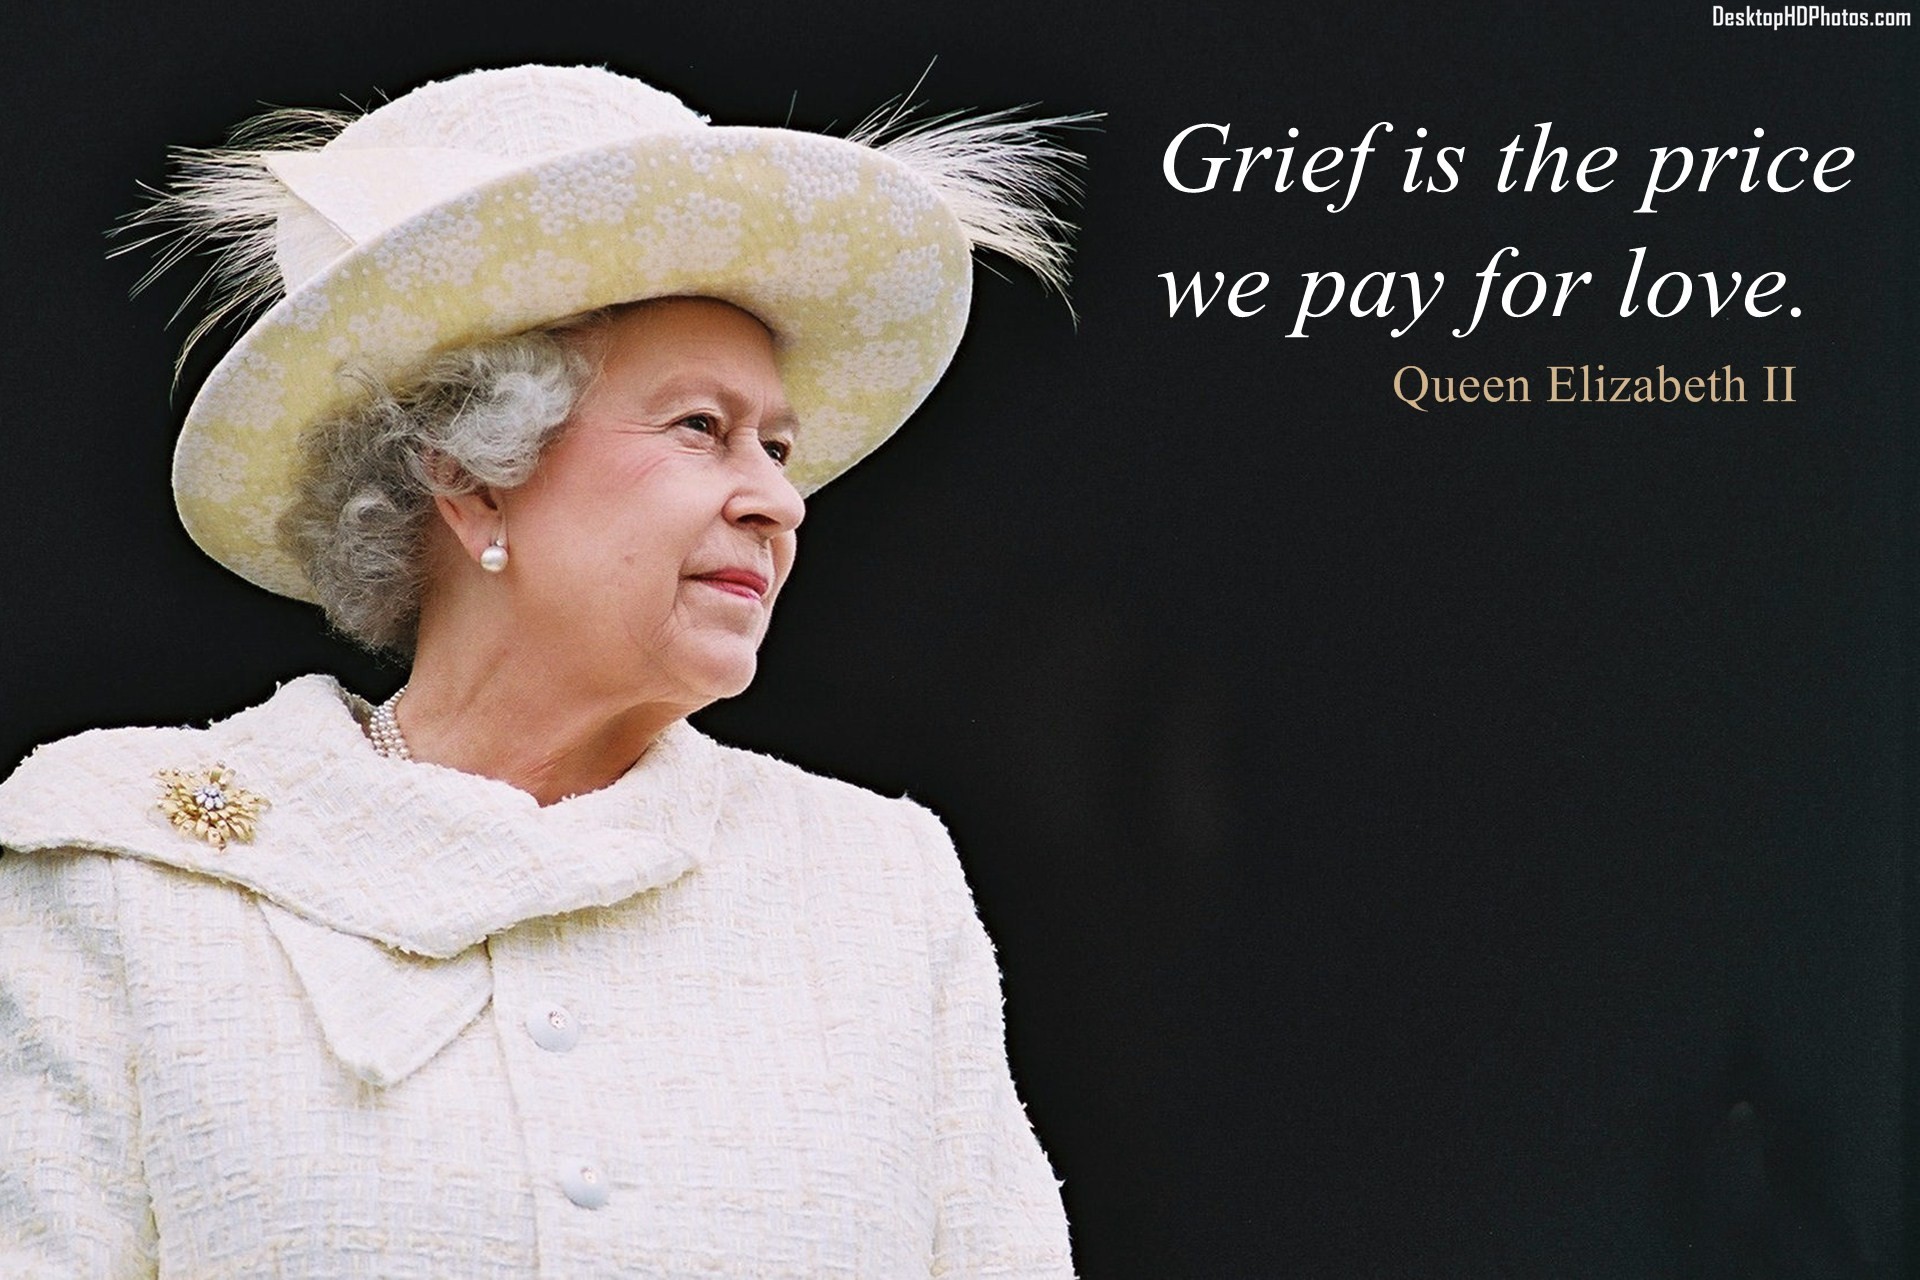 Queen Elizabeth Ii Quotes Grief Is The Price We Pay For Love